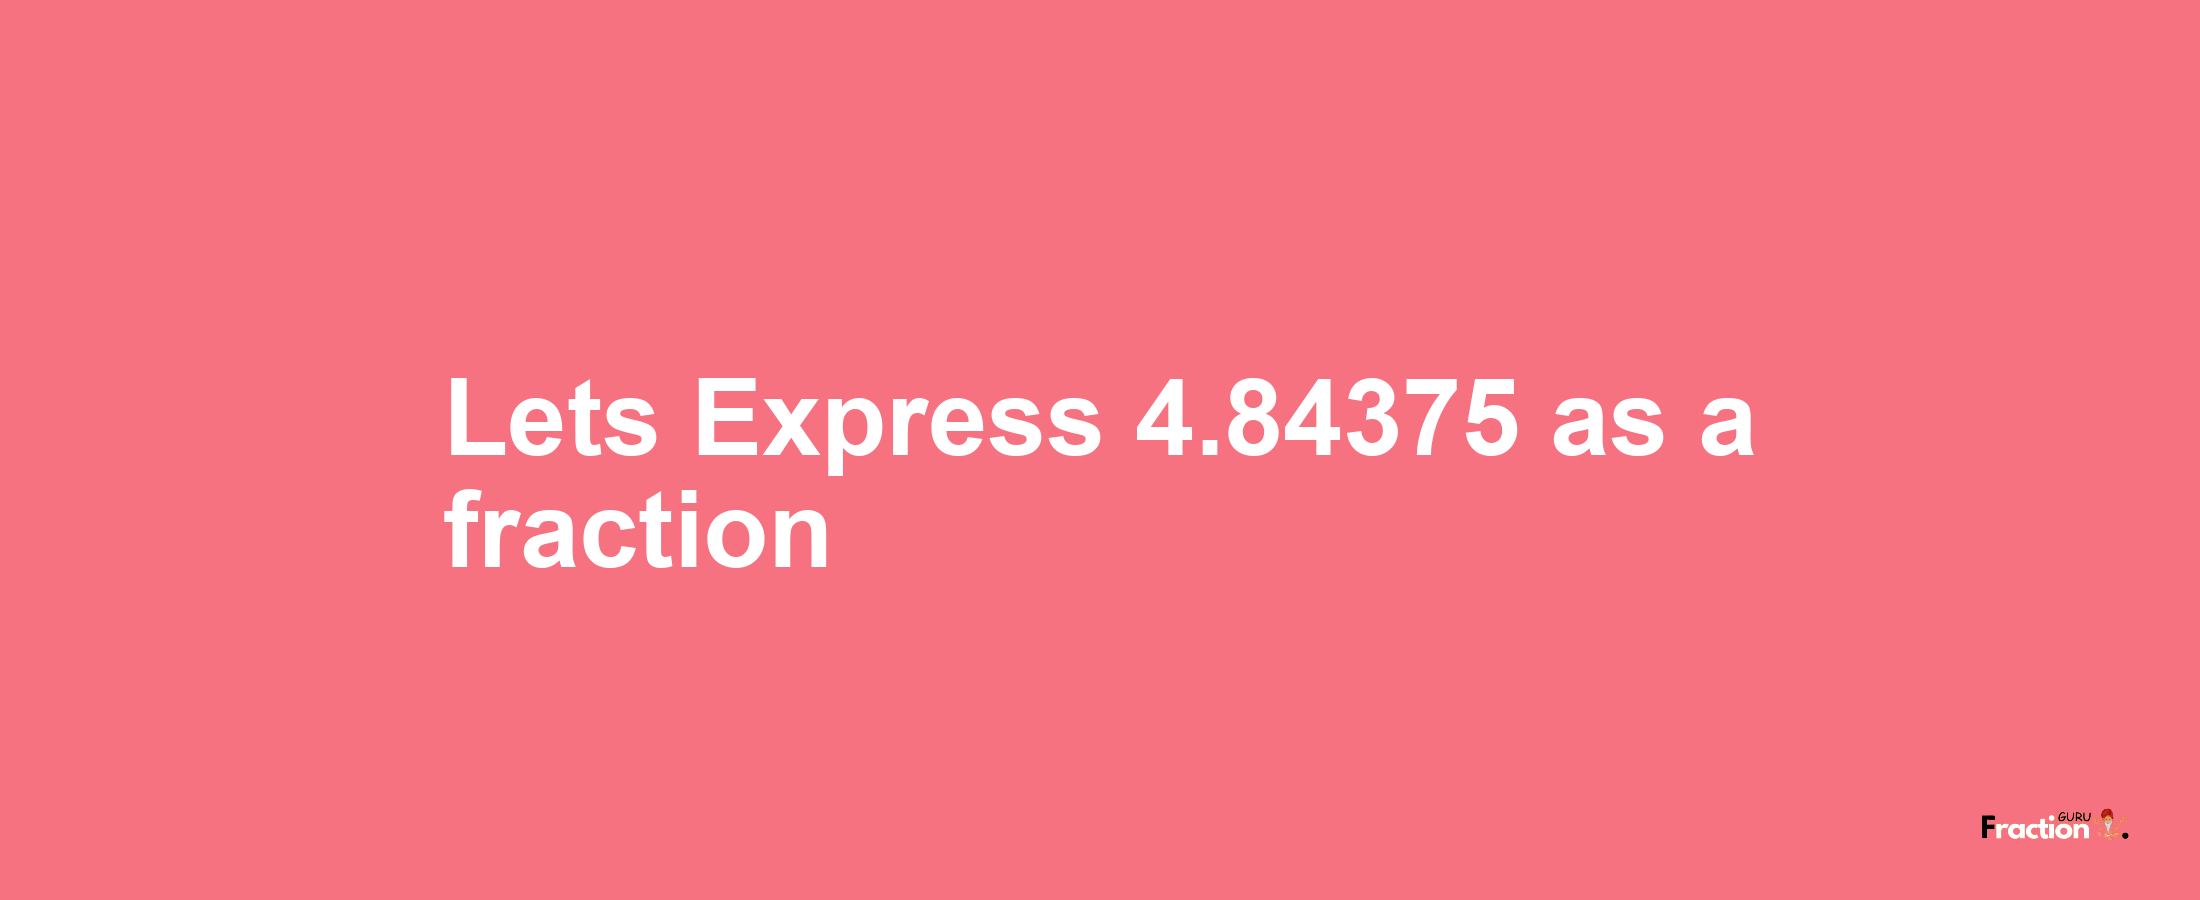 Lets Express 4.84375 as afraction